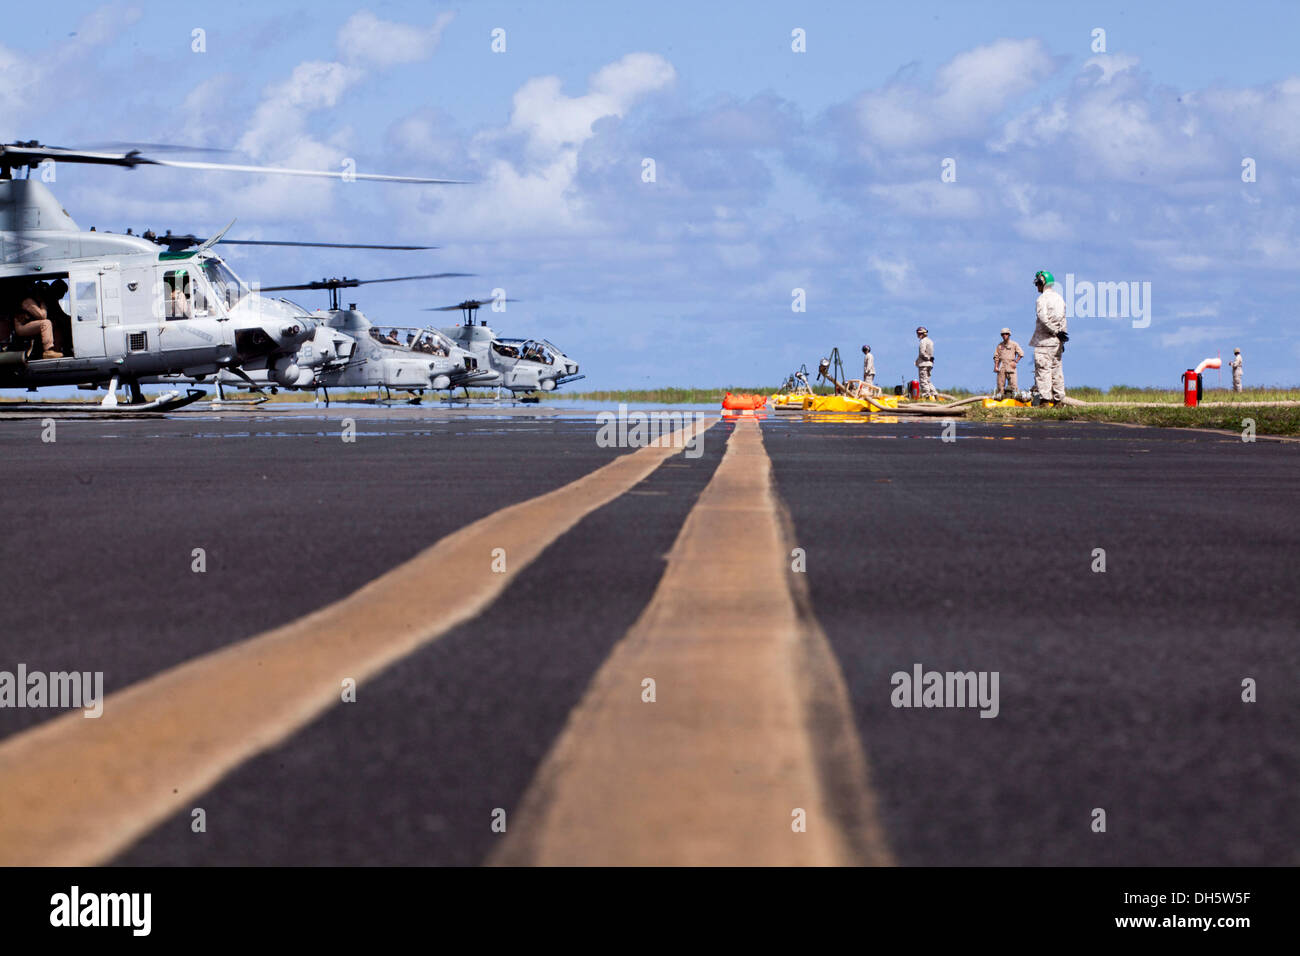 U.S. Marines with Marine Wing Support Detachment (MWSD) 24, waits to refuel landed helicopters during an exercise demonstrating Stock Photo